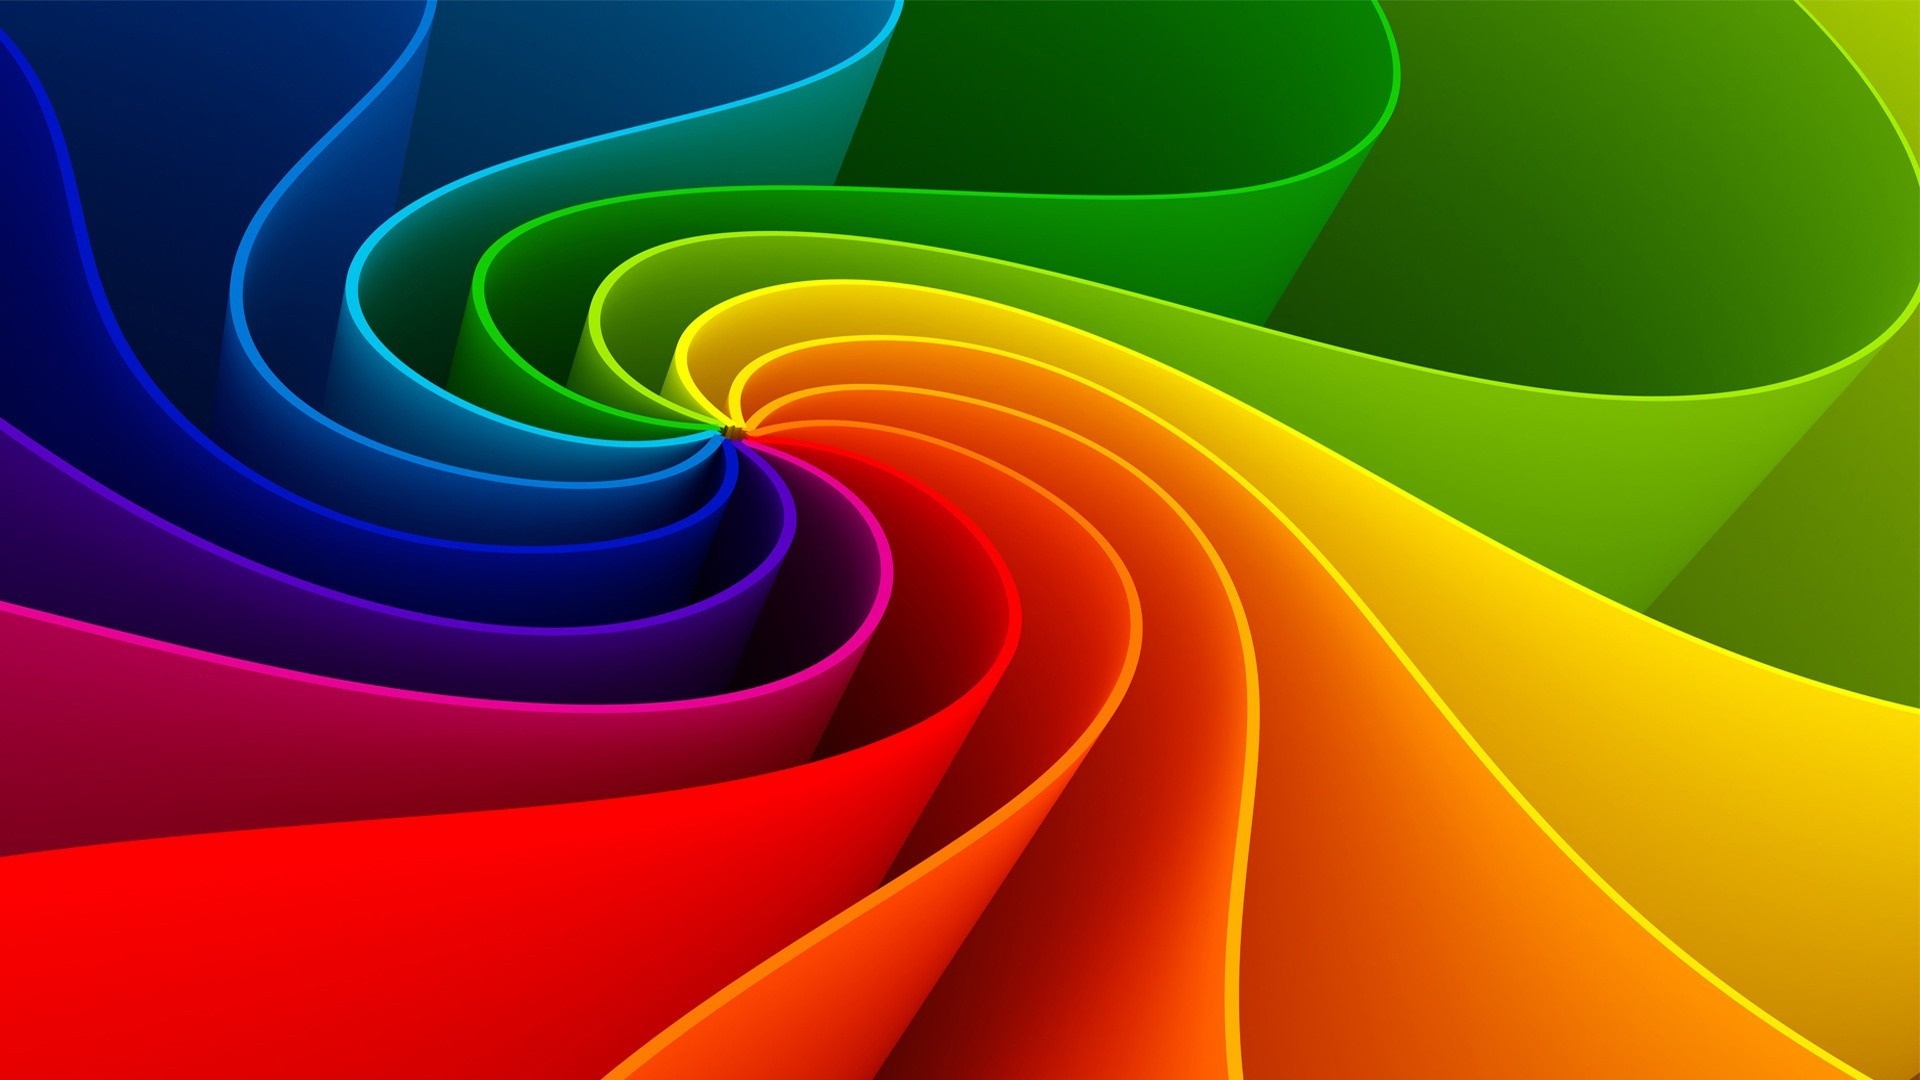 Abstract Rainbow Wallpapers Hd Wallpaper 3d Abstract - Multicolor Hd - HD Wallpaper 